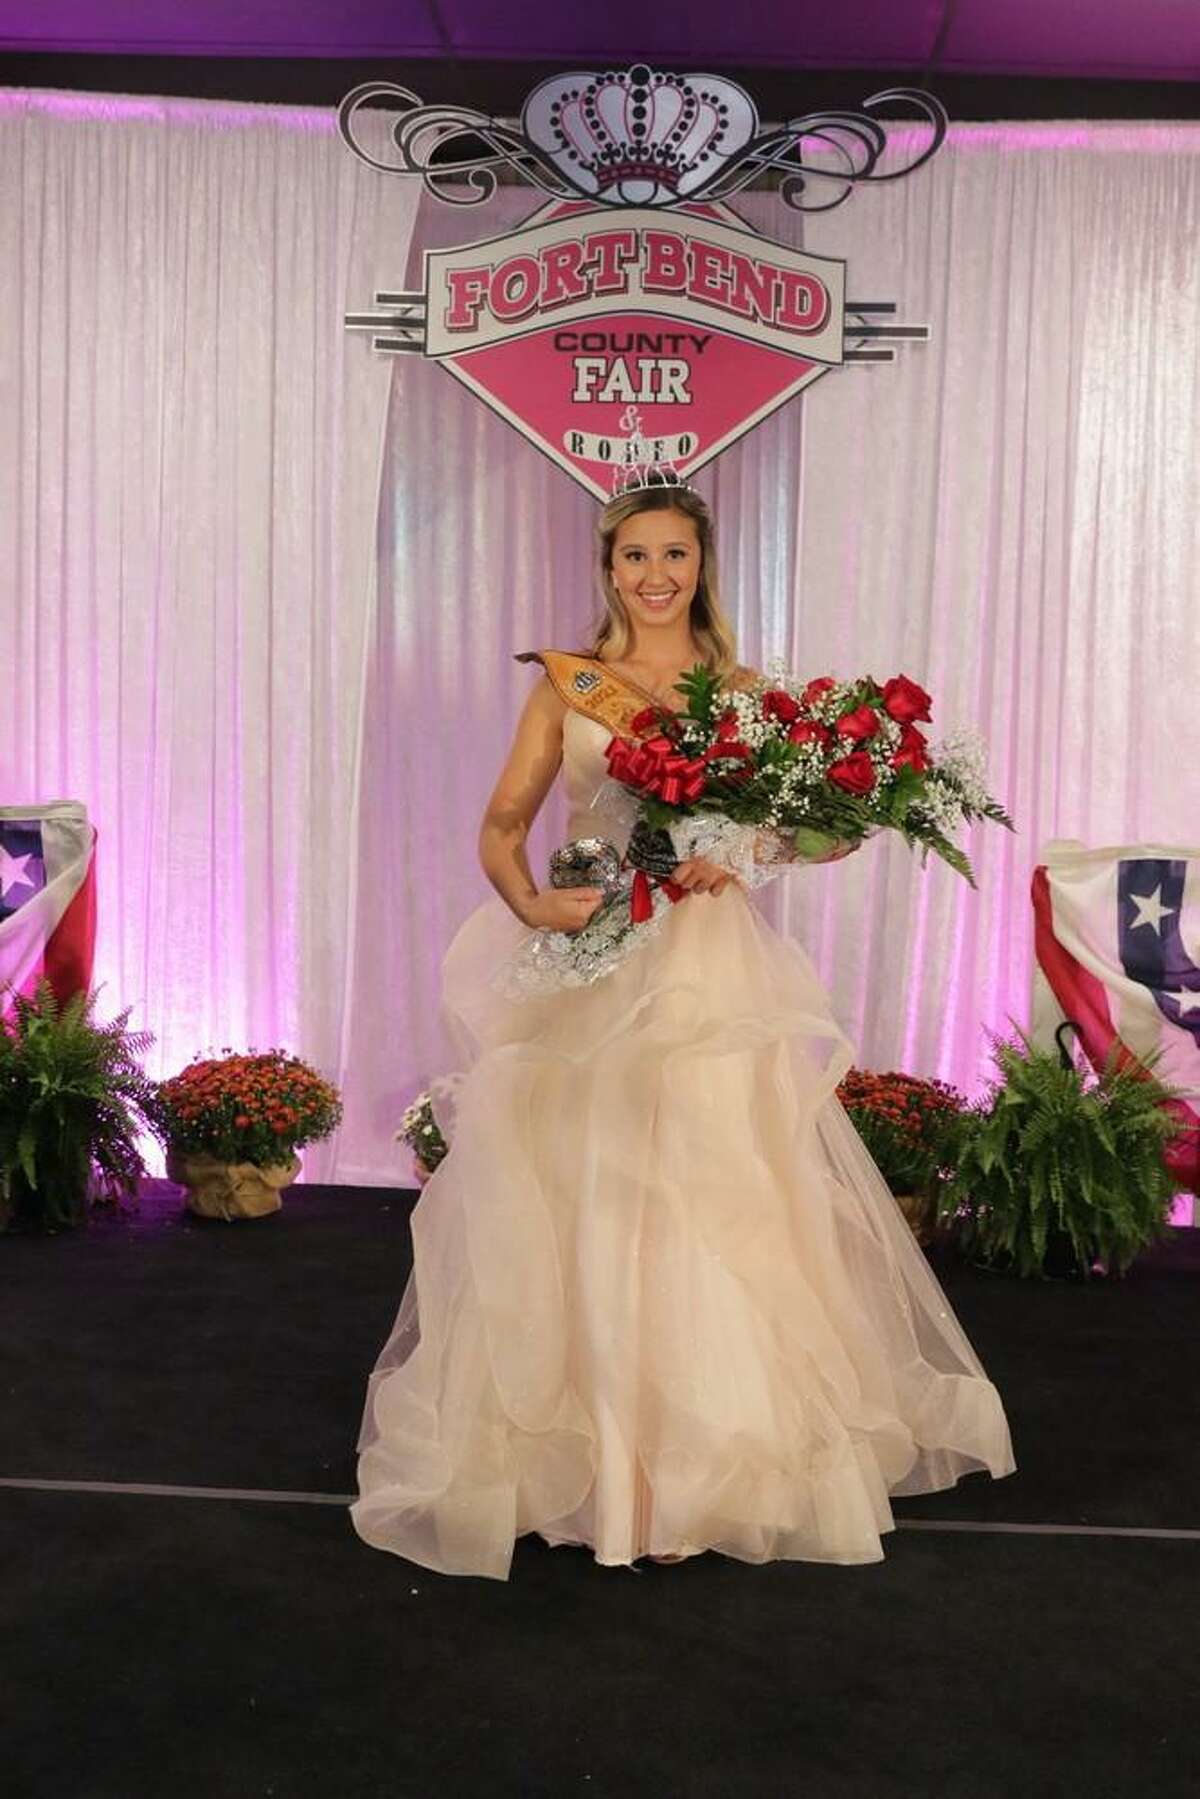 Meadow Votis, the 2021 Fort Bend County Fair Queen will pass her crown and title to a successor at the 2022 Fort Bend County Fair and Rodeo.